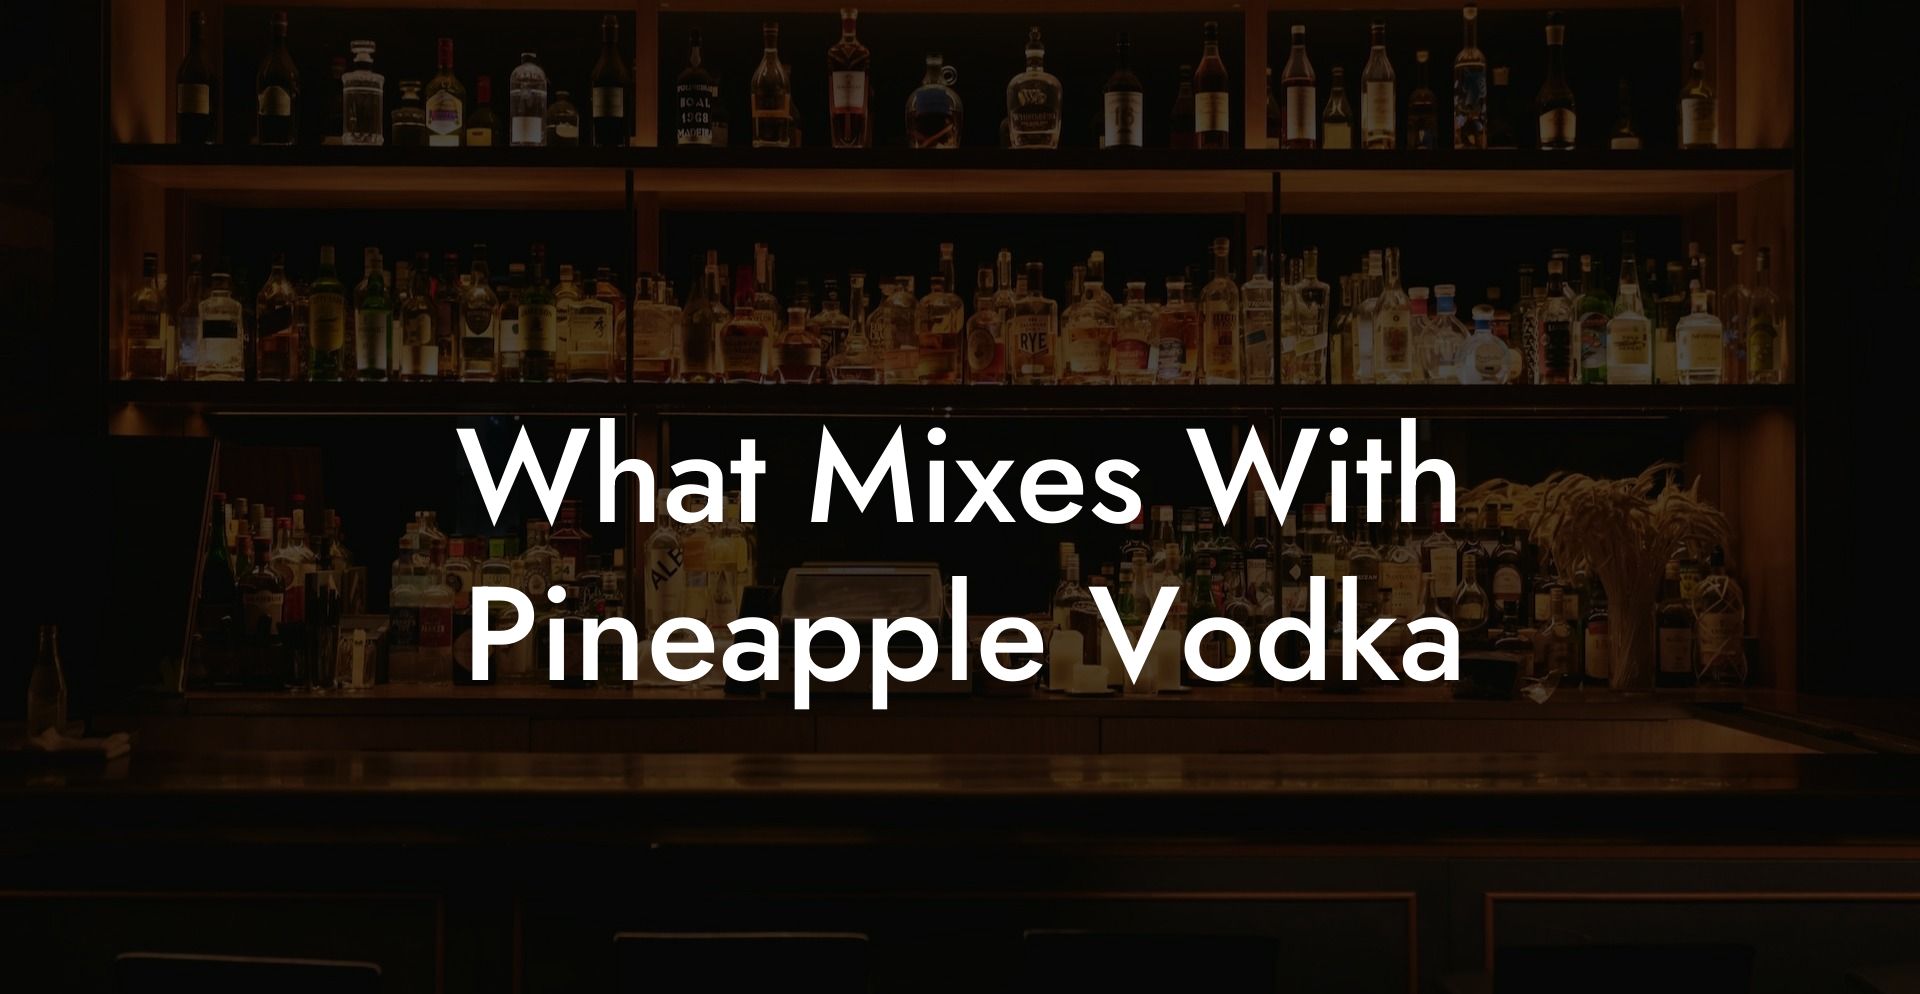 What Mixes With Pineapple Vodka